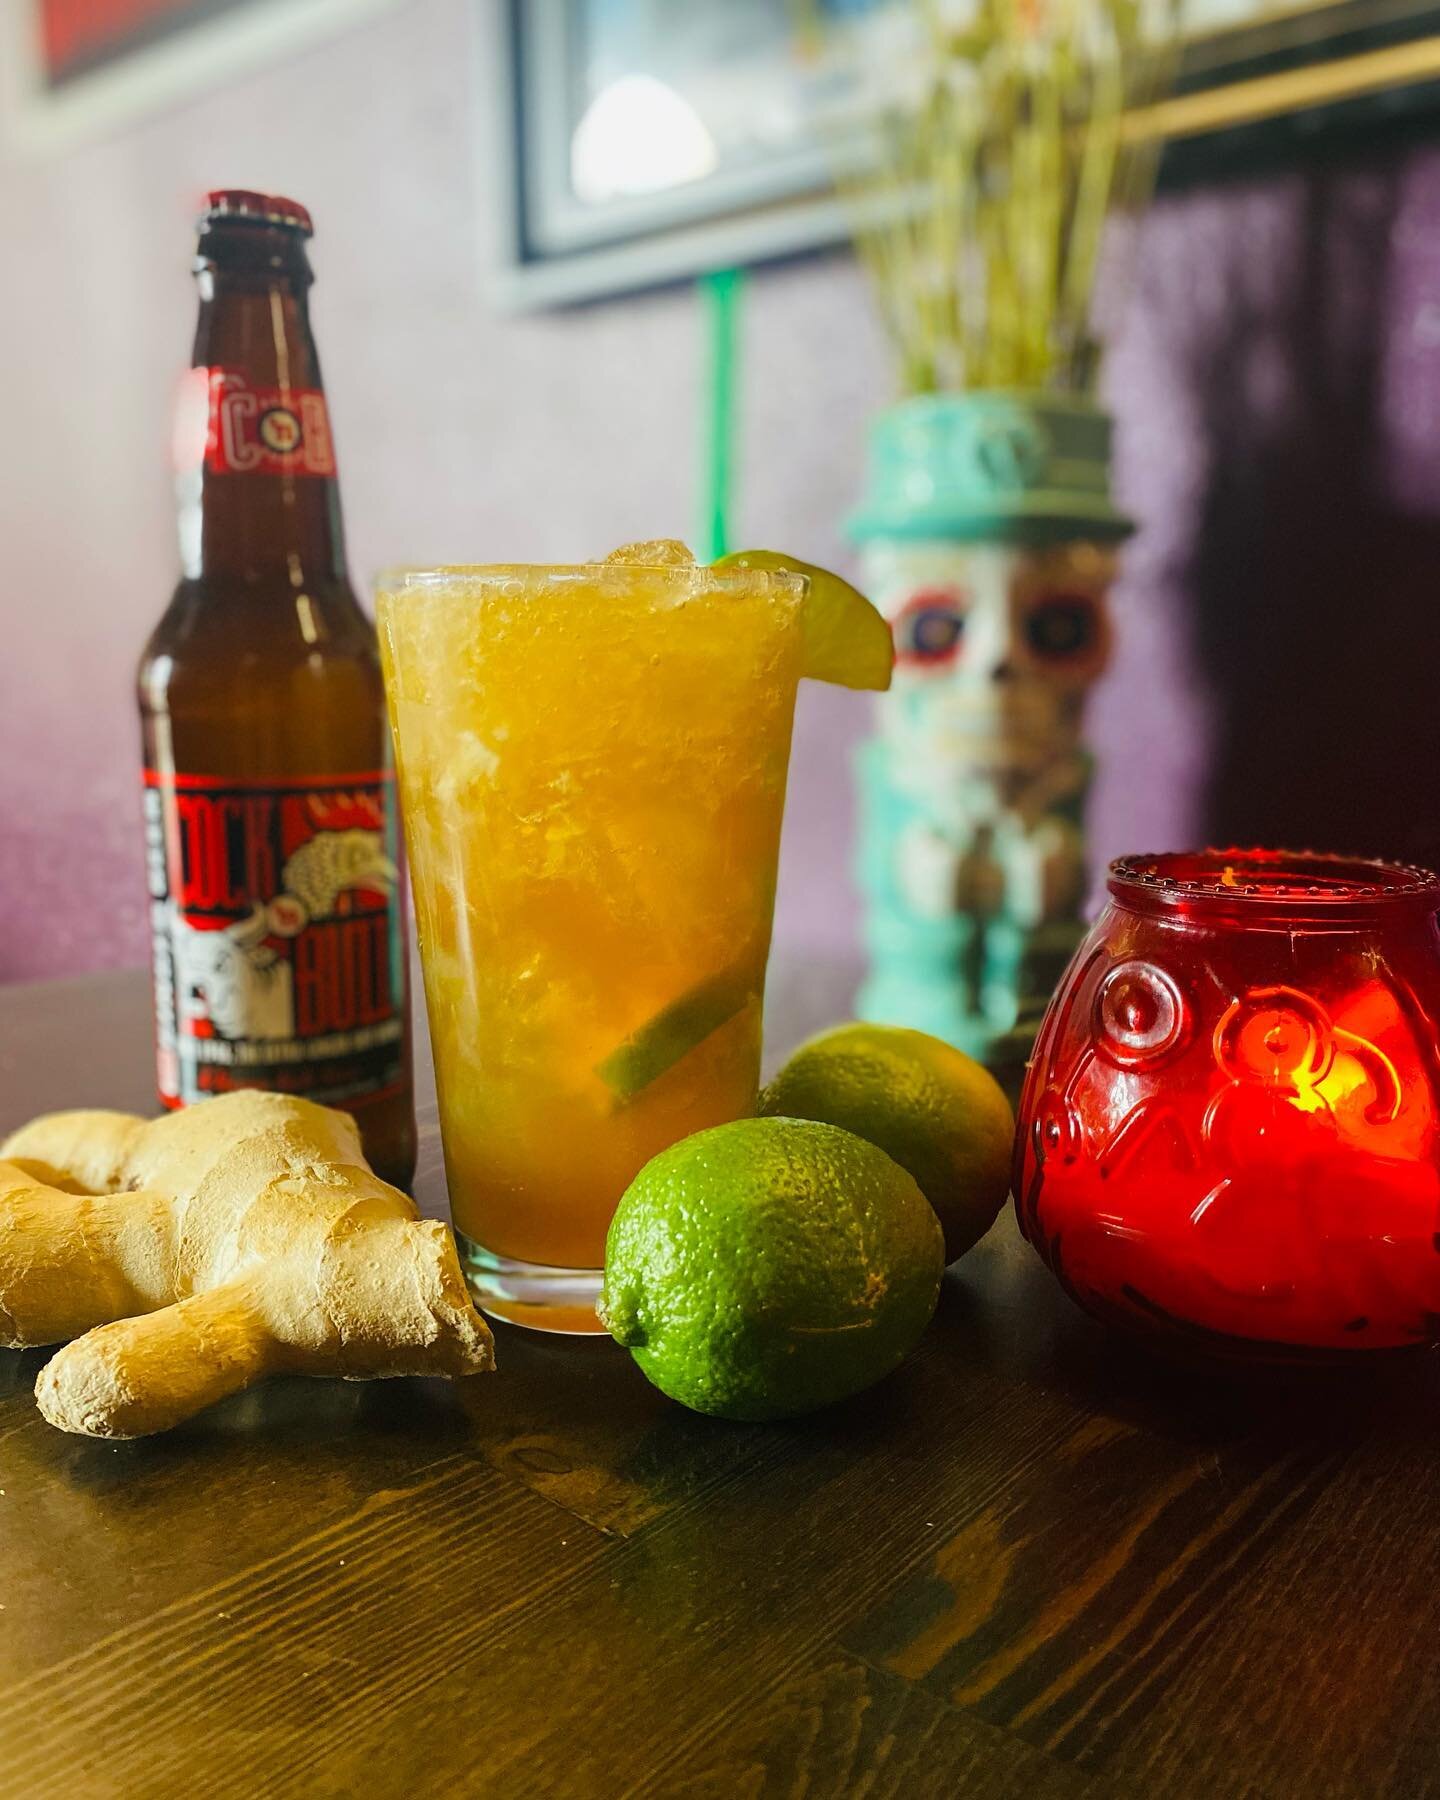 NiteOwl&rsquo;s Dark &amp; Stormy! Gosling&rsquo;s dark Rum, lots of fresh muddled limes, topped with cock&rsquo;n bull ginger beer. A perfect spring concoction! 🦉
.
.
737 Main St. Unit F. (8th &amp; Main) 
Open Tue-Thurs 5pm to LastCall &amp; Fri-S